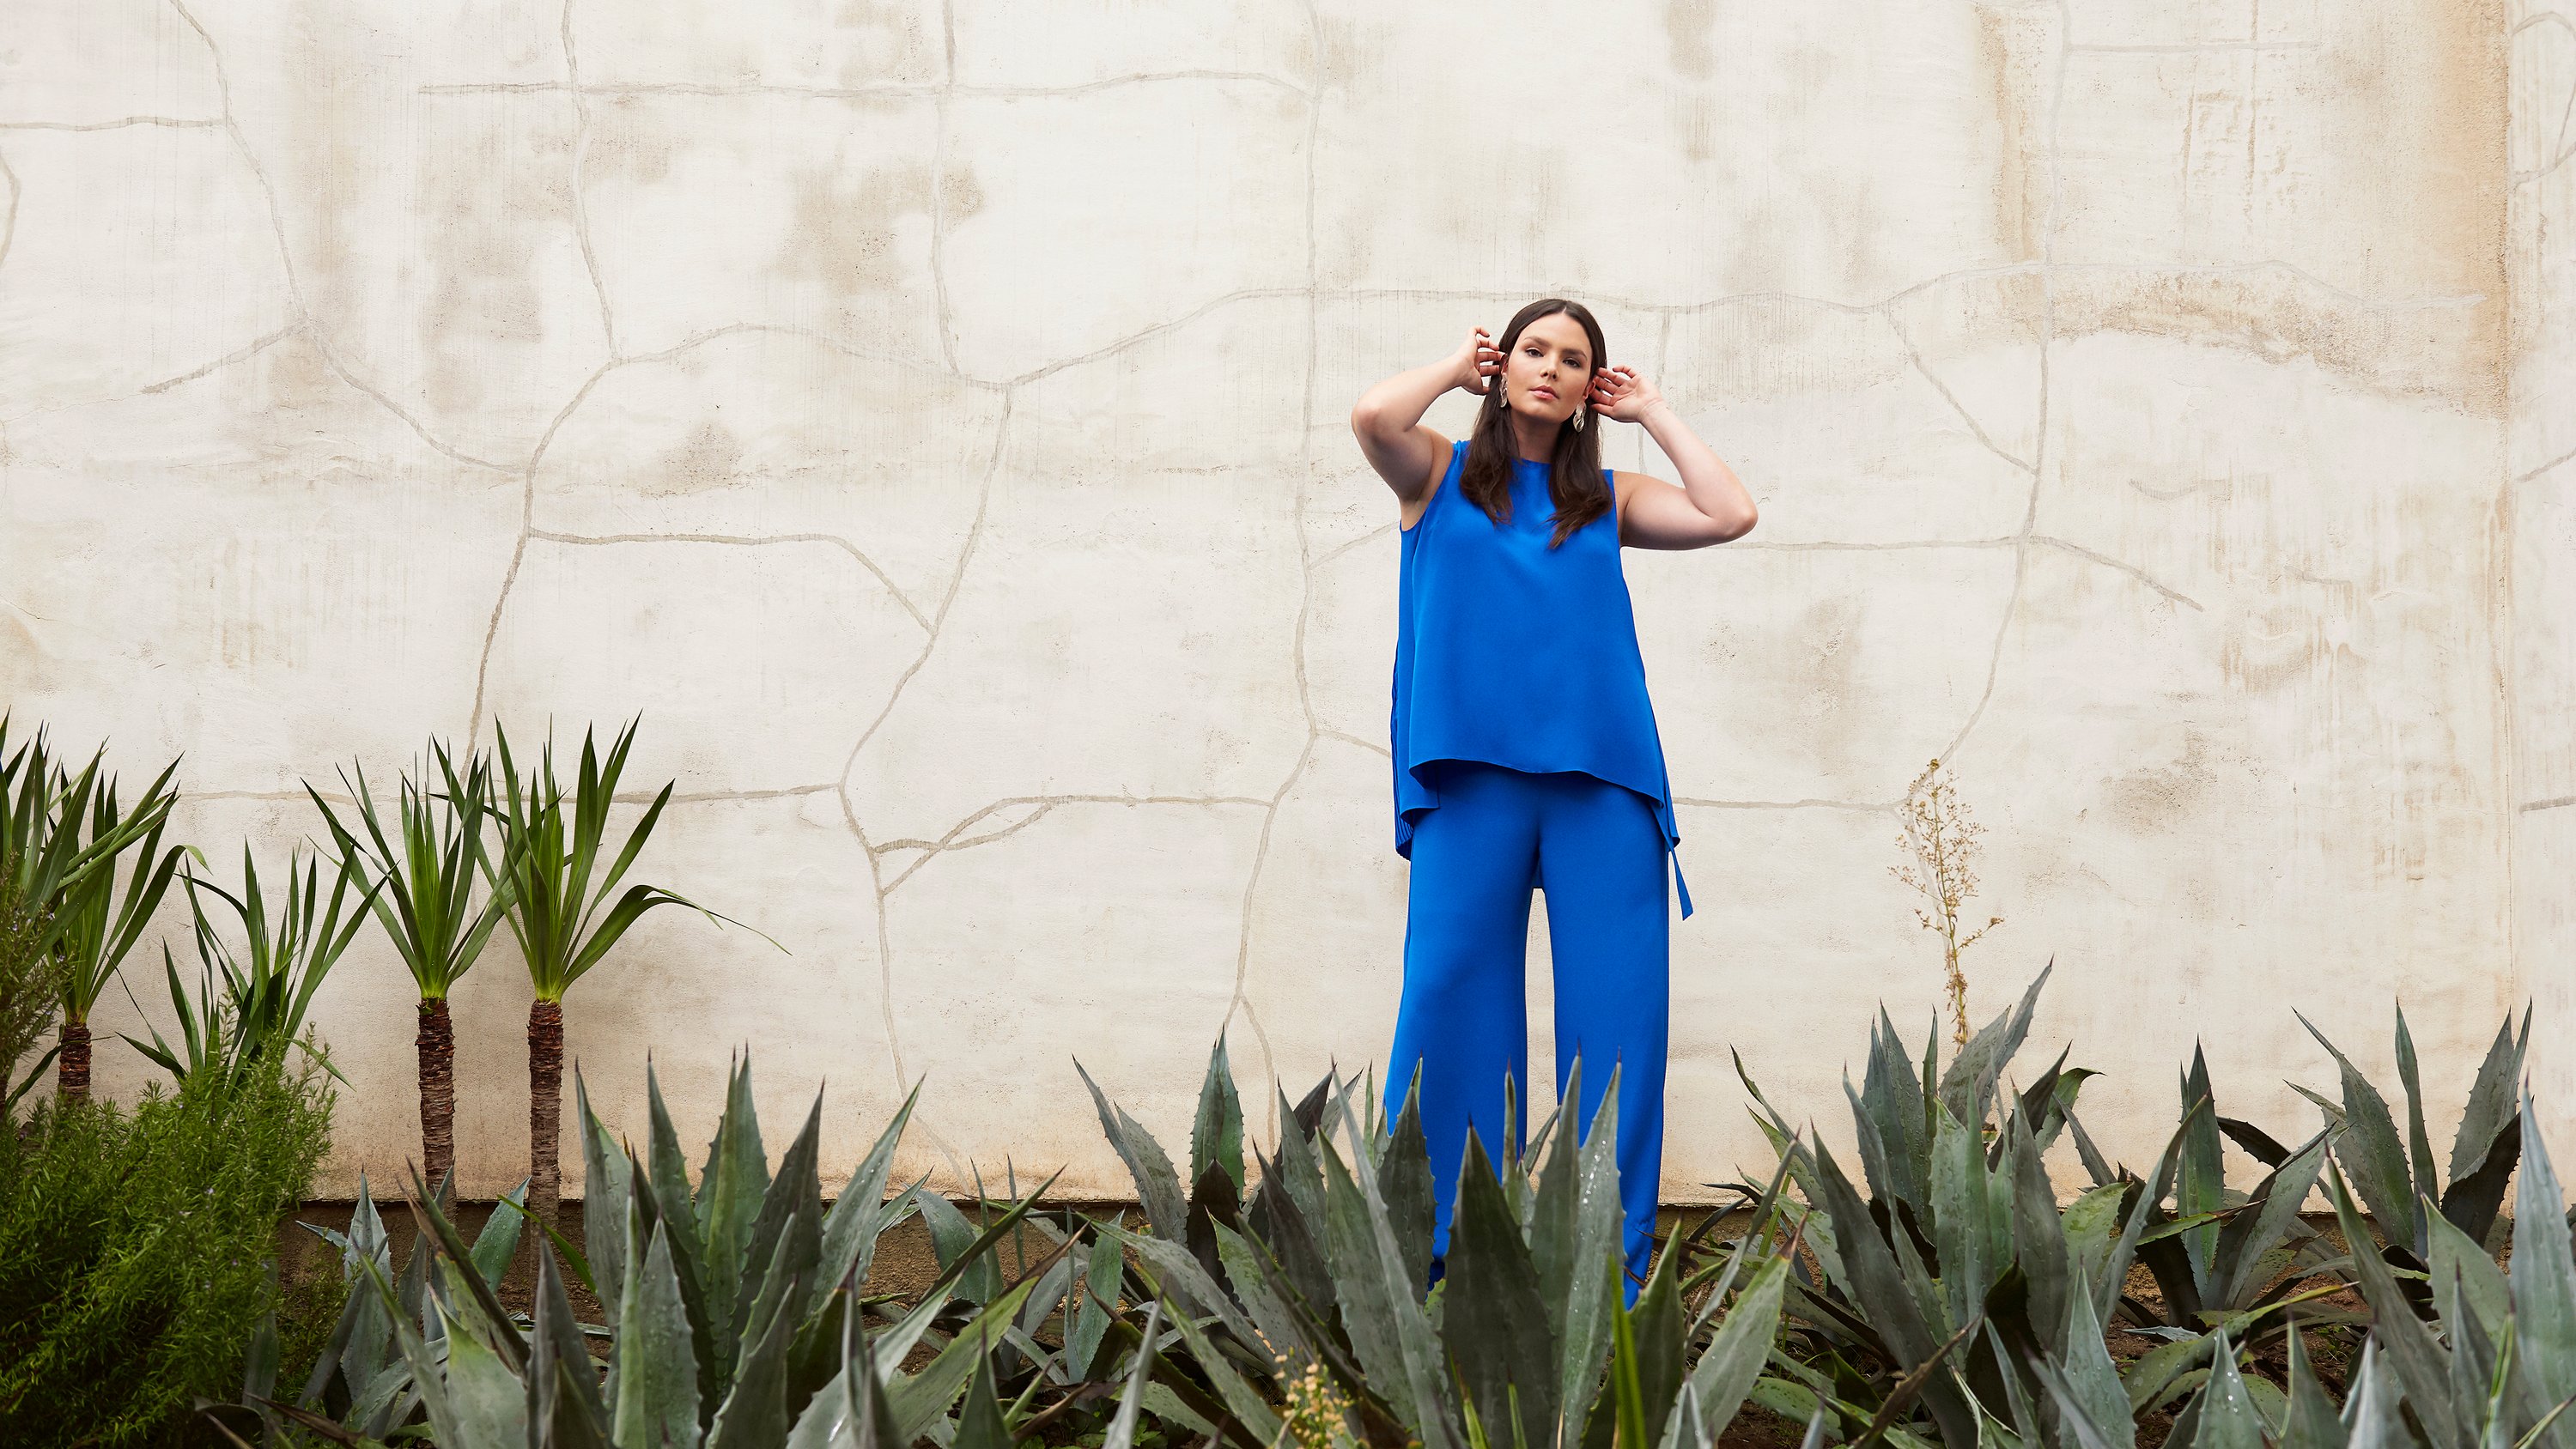 Model Candice Huffine wearing matching blue top and pants, Ad campaign. Art Direction by RoAndCo   